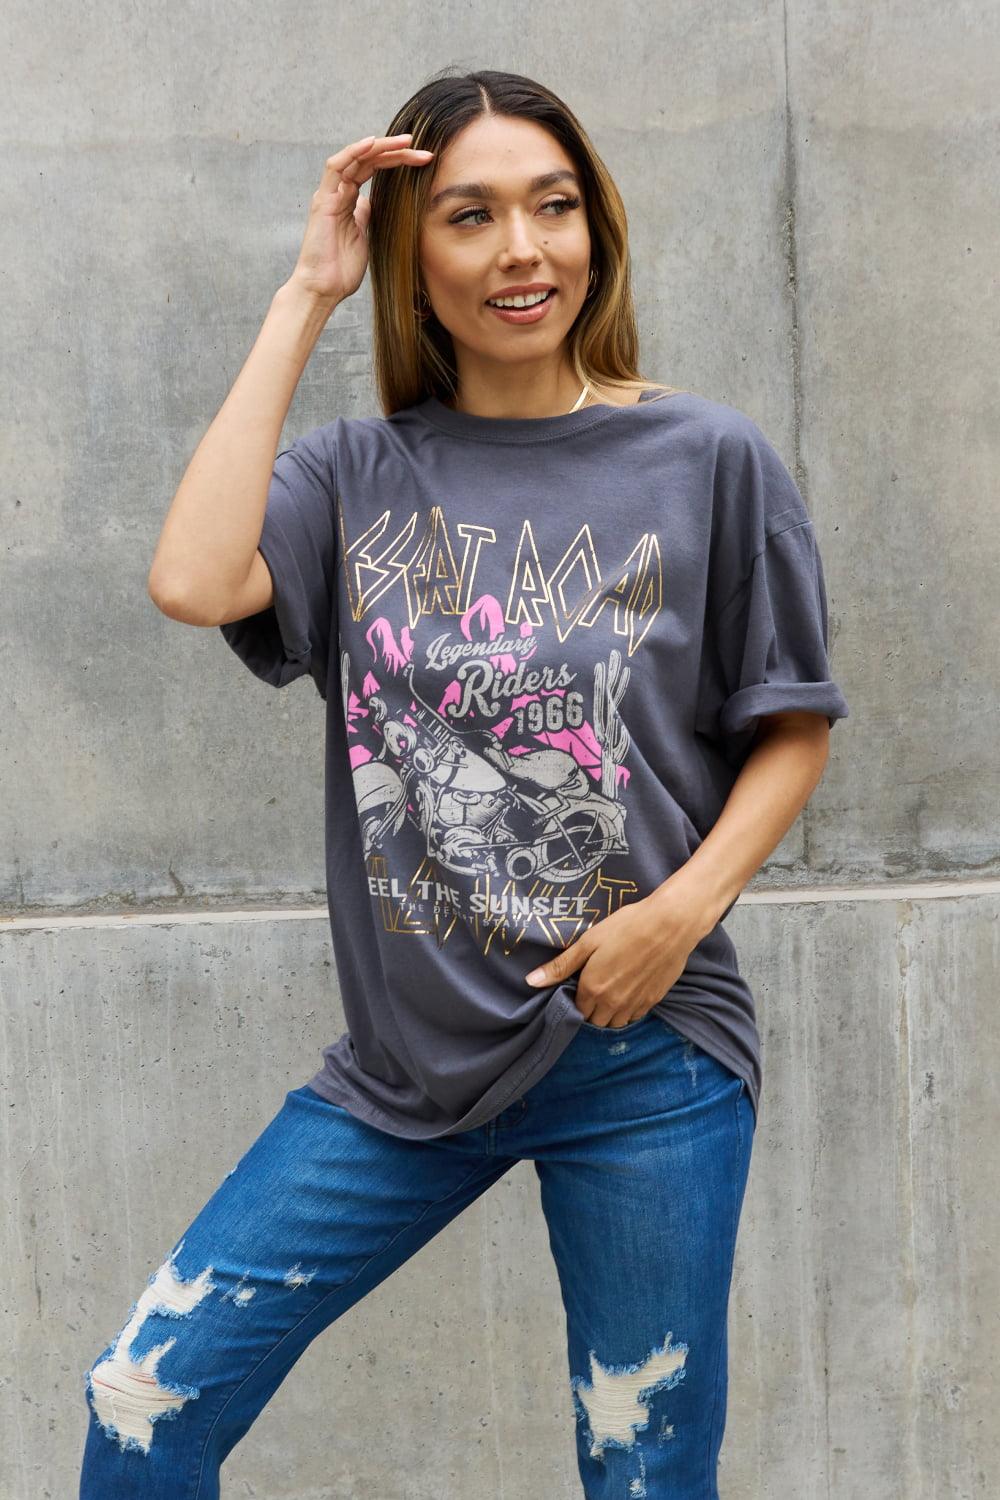 Sweet Claire "Desert Road" Graphic T-Shirt - The Fiery Jasmine